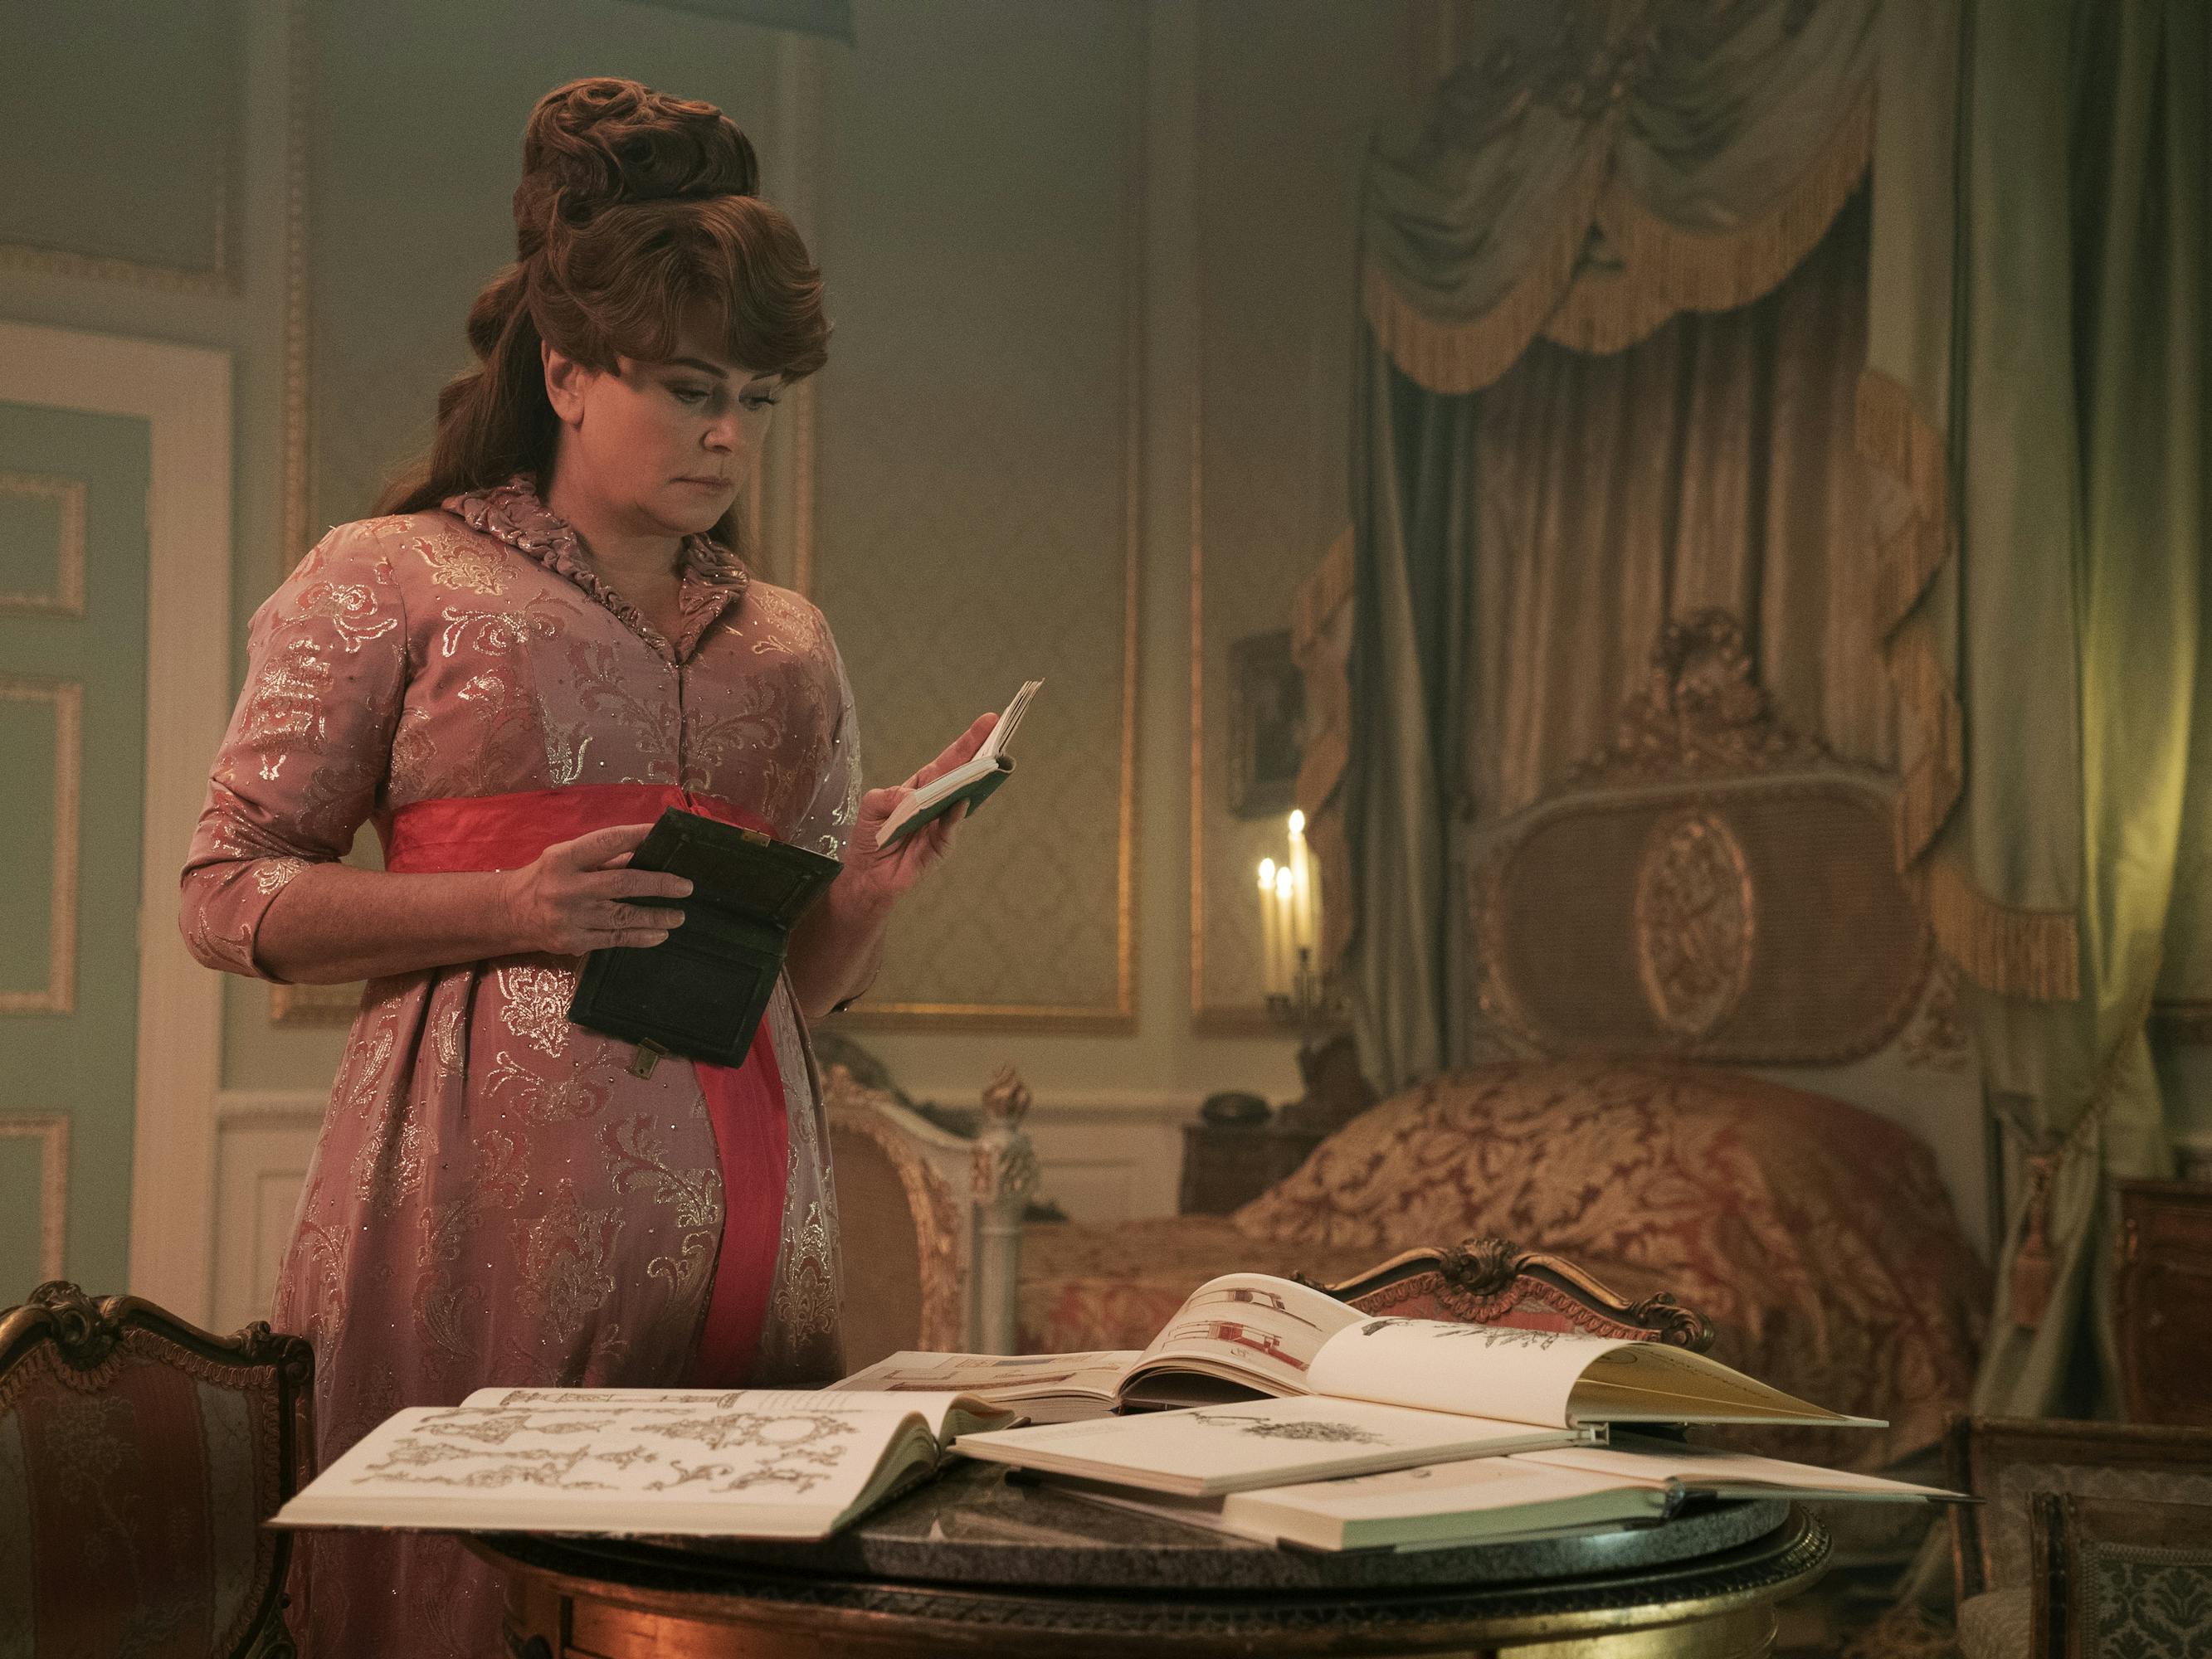 Lady Featherington (Polly Walker) looks over some books in a candle lit room.